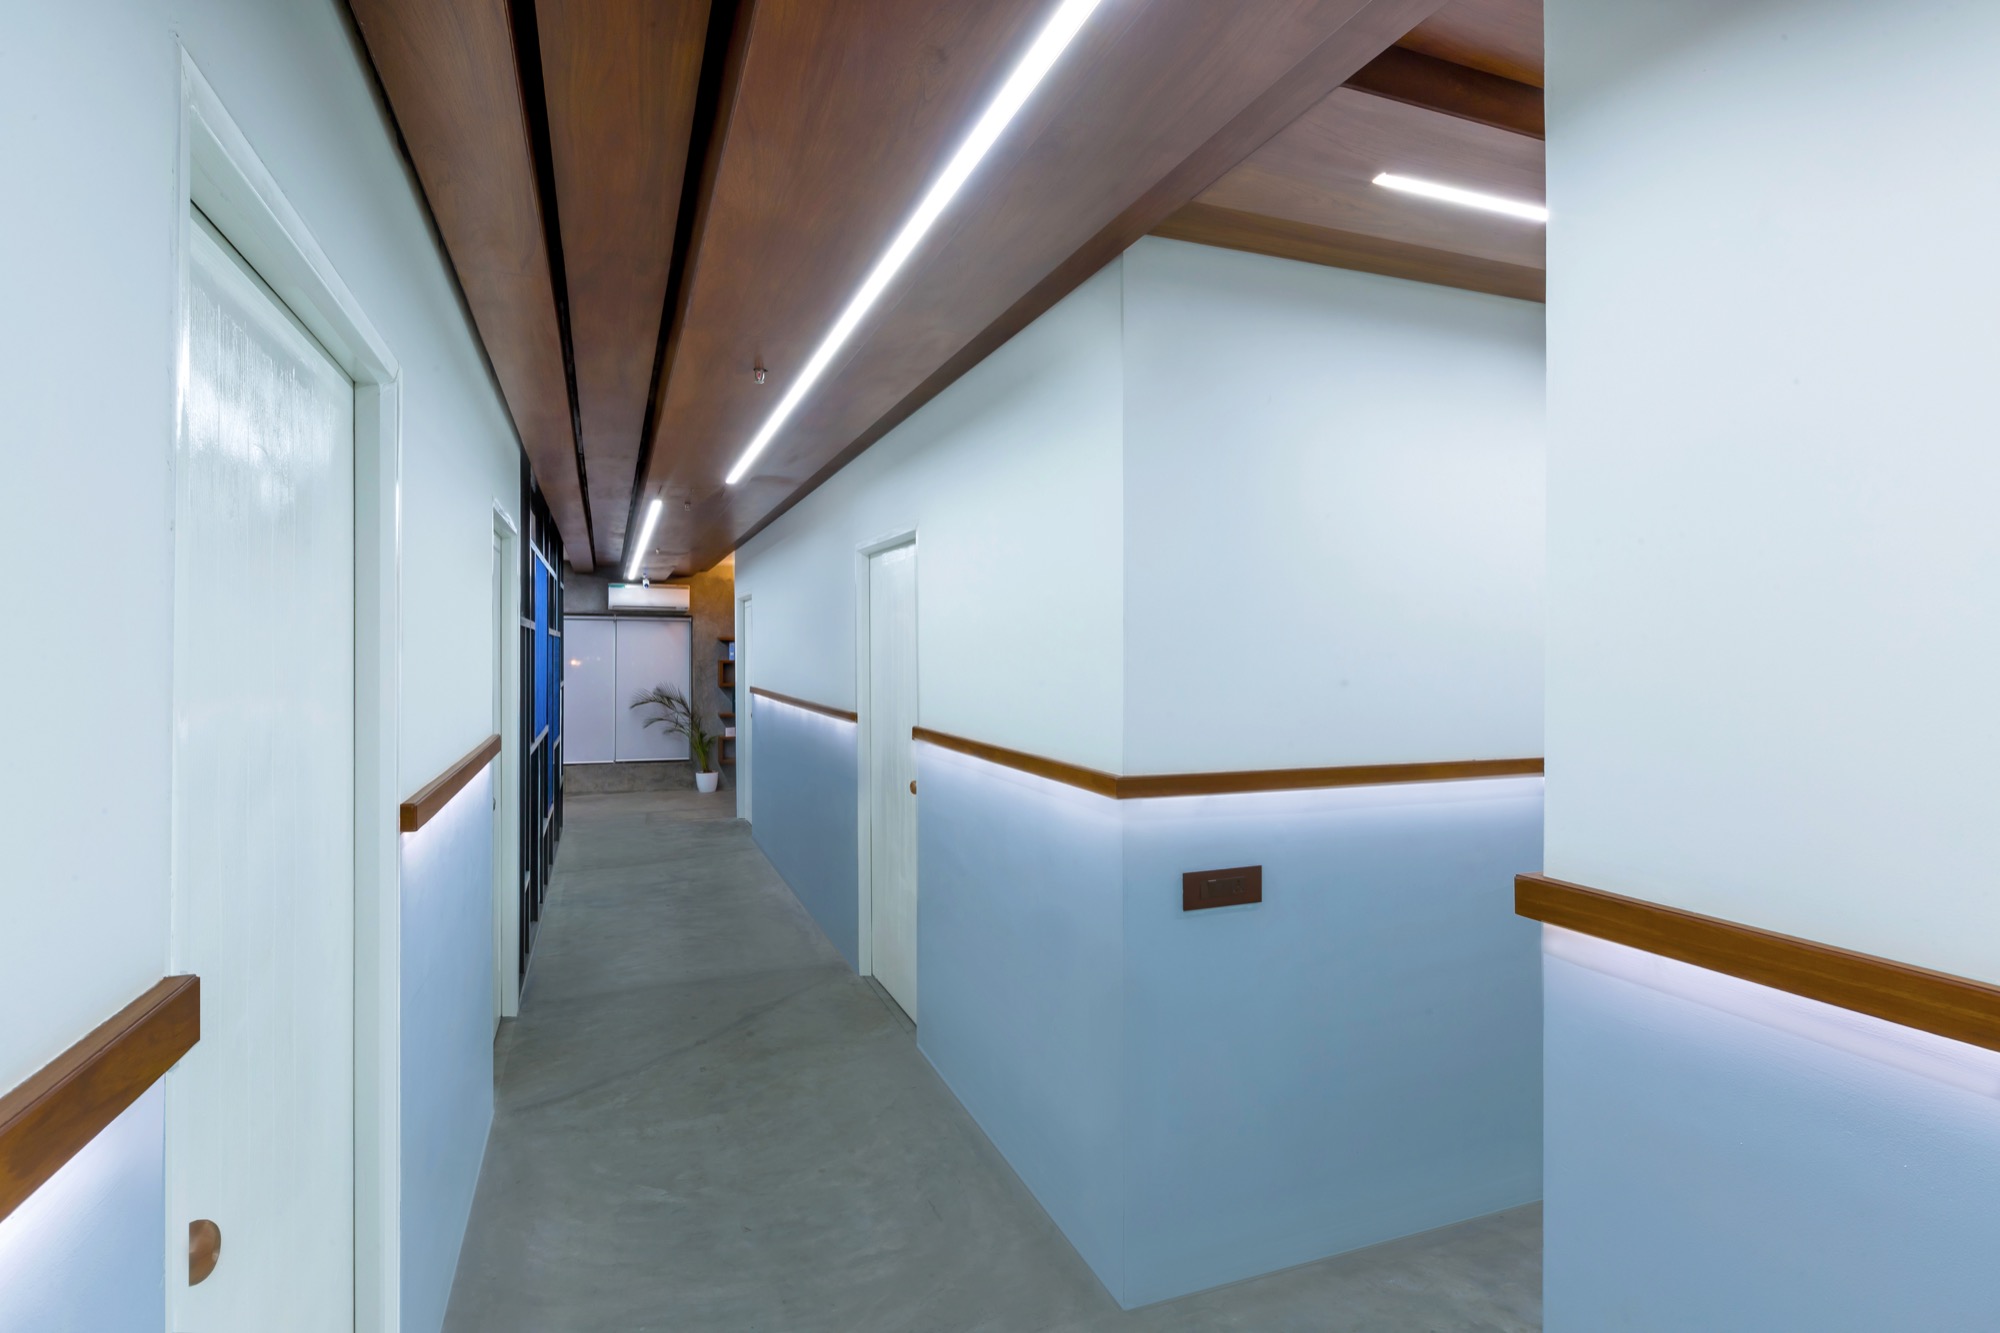 Nava Clinic at Hyderabad, An Earthy Oasis of Wellness, designed by Beyond Spaces Design Studio 31